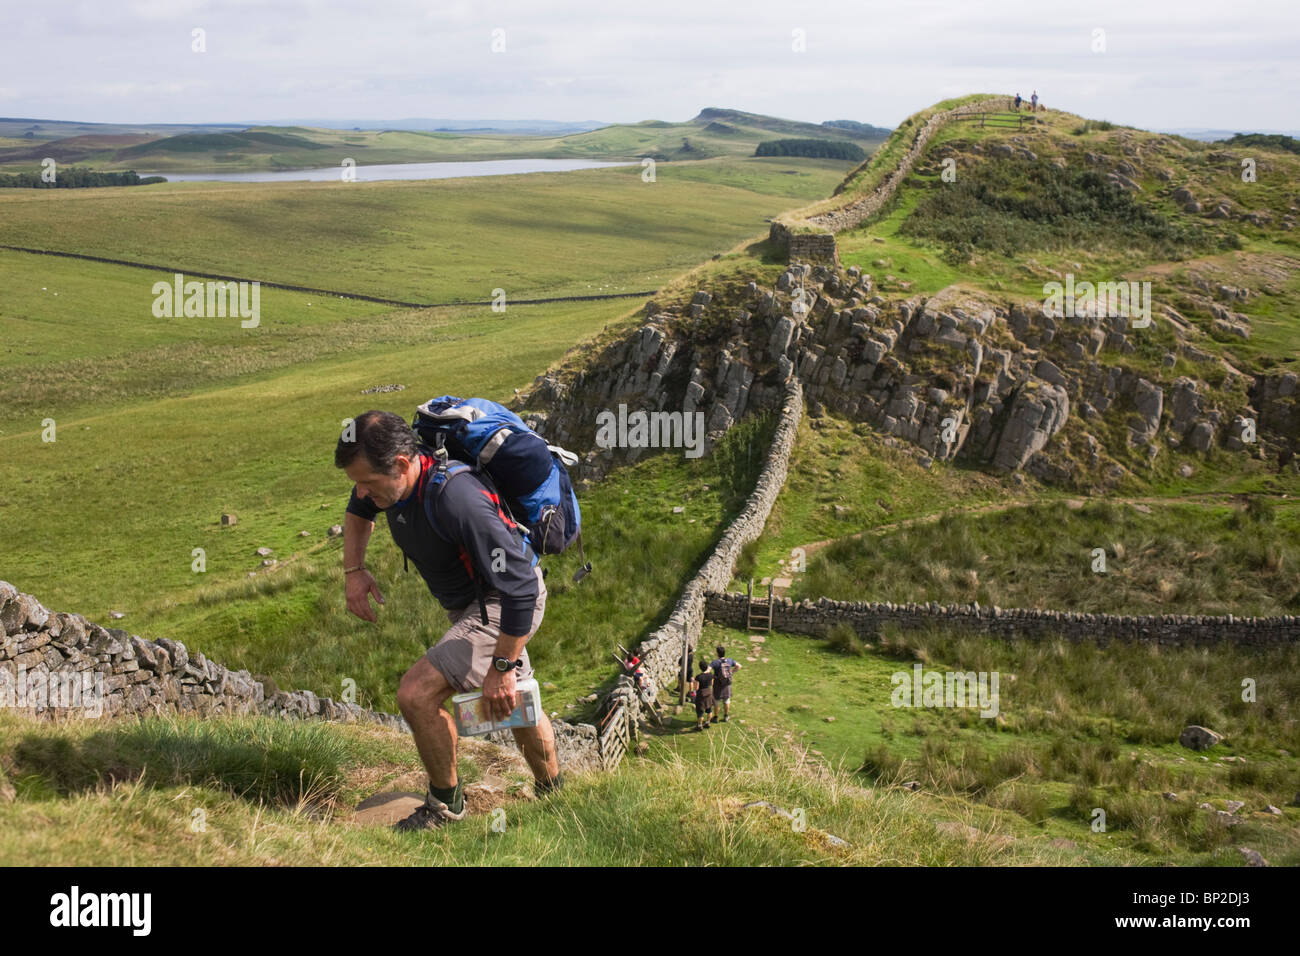 Walker climbs steep path on Roman Emperor Hadrian's Wall, once the northern frontier of Rome's empire from Barbarian tribes. Stock Photo